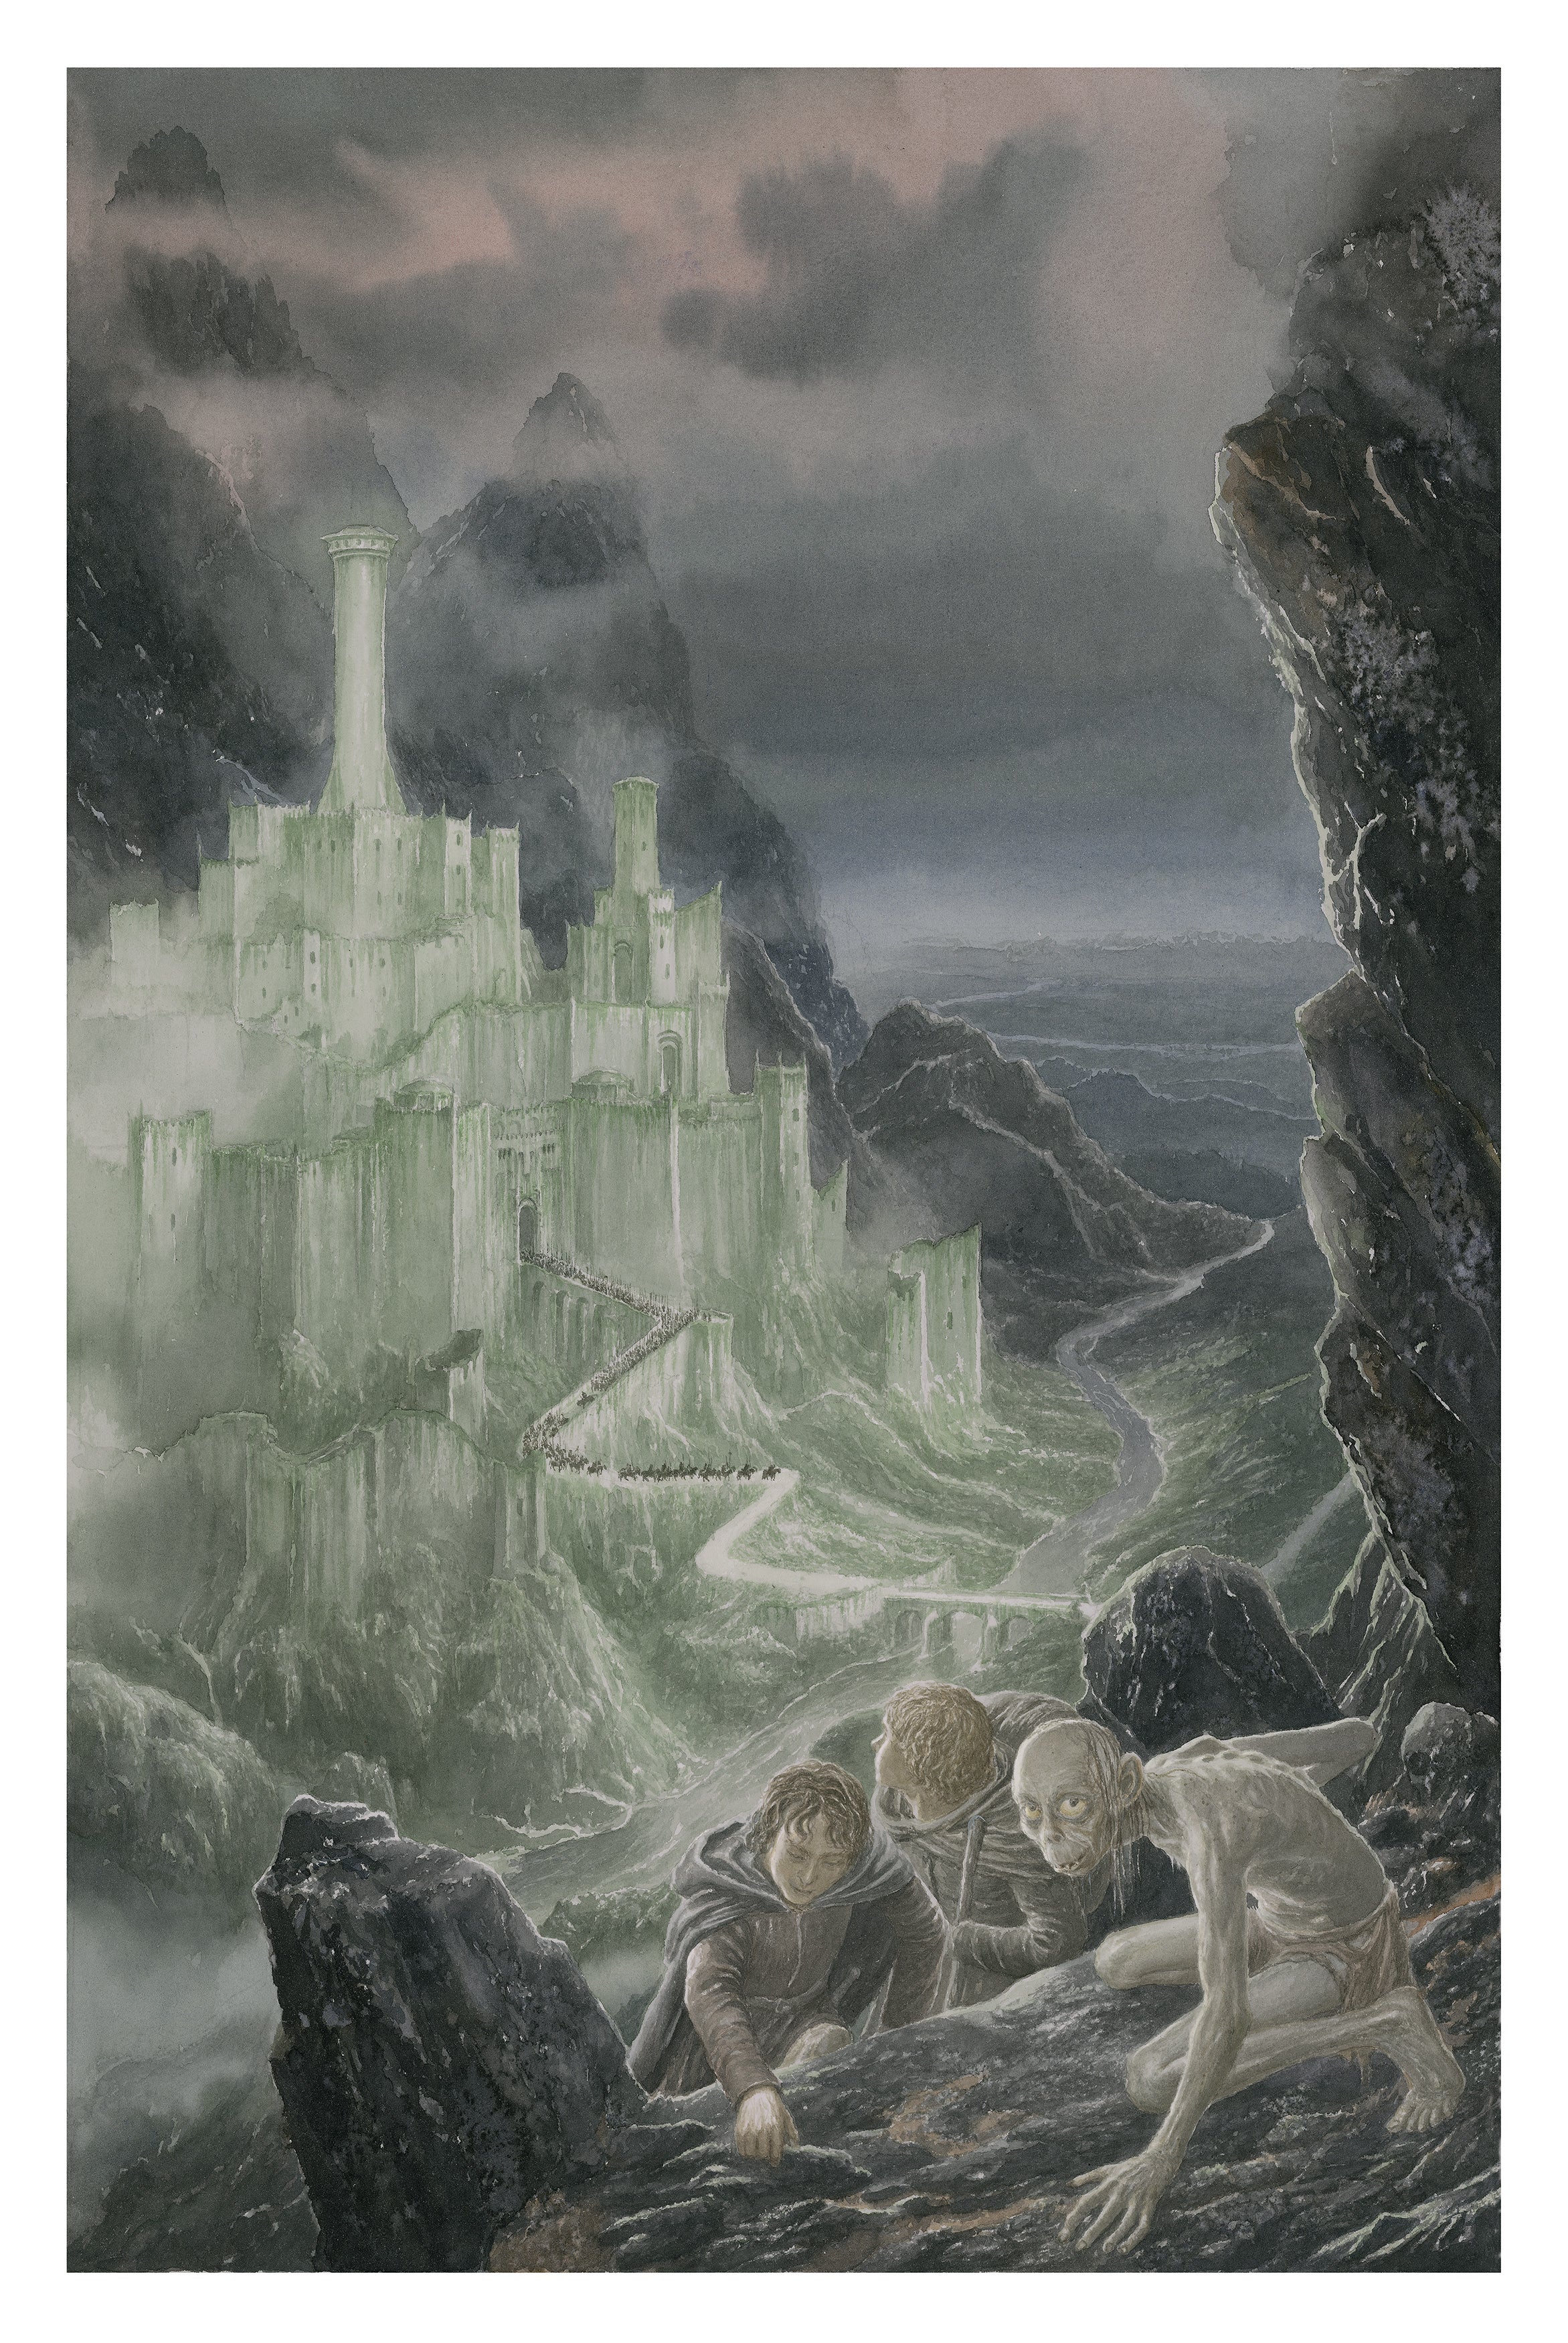 Image: ©Alan Lee for The Folio Society’s edition of J.R.R. Tolkien’s The Lord of the Rings.